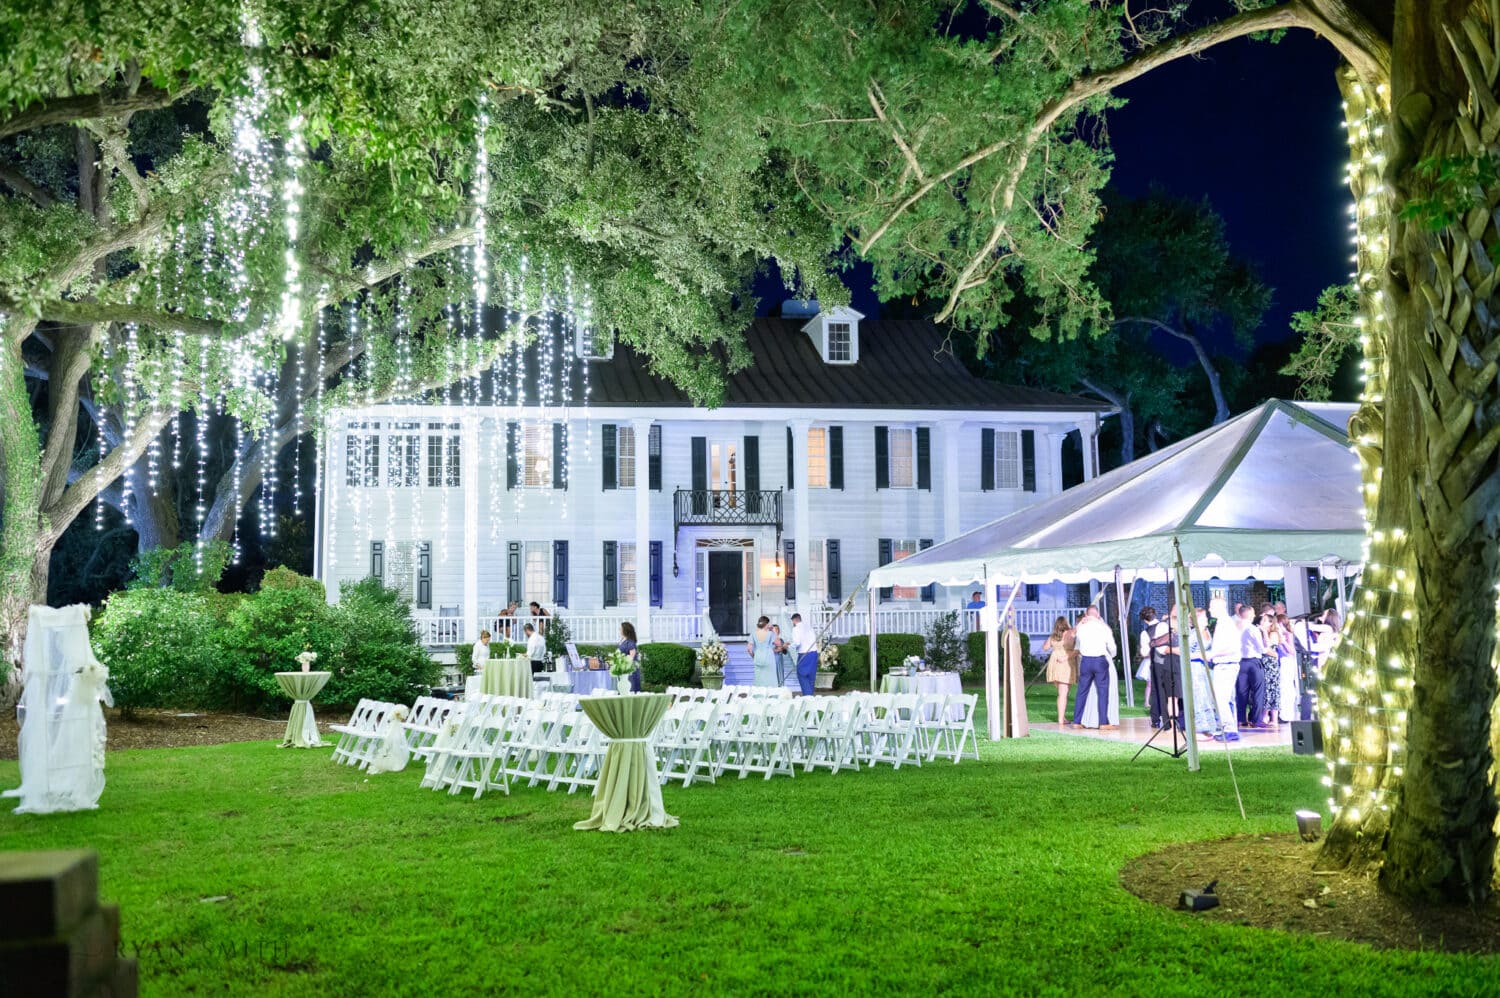 Pictures of the reception tent with lights hanging from the trees - Kaminski House Museum